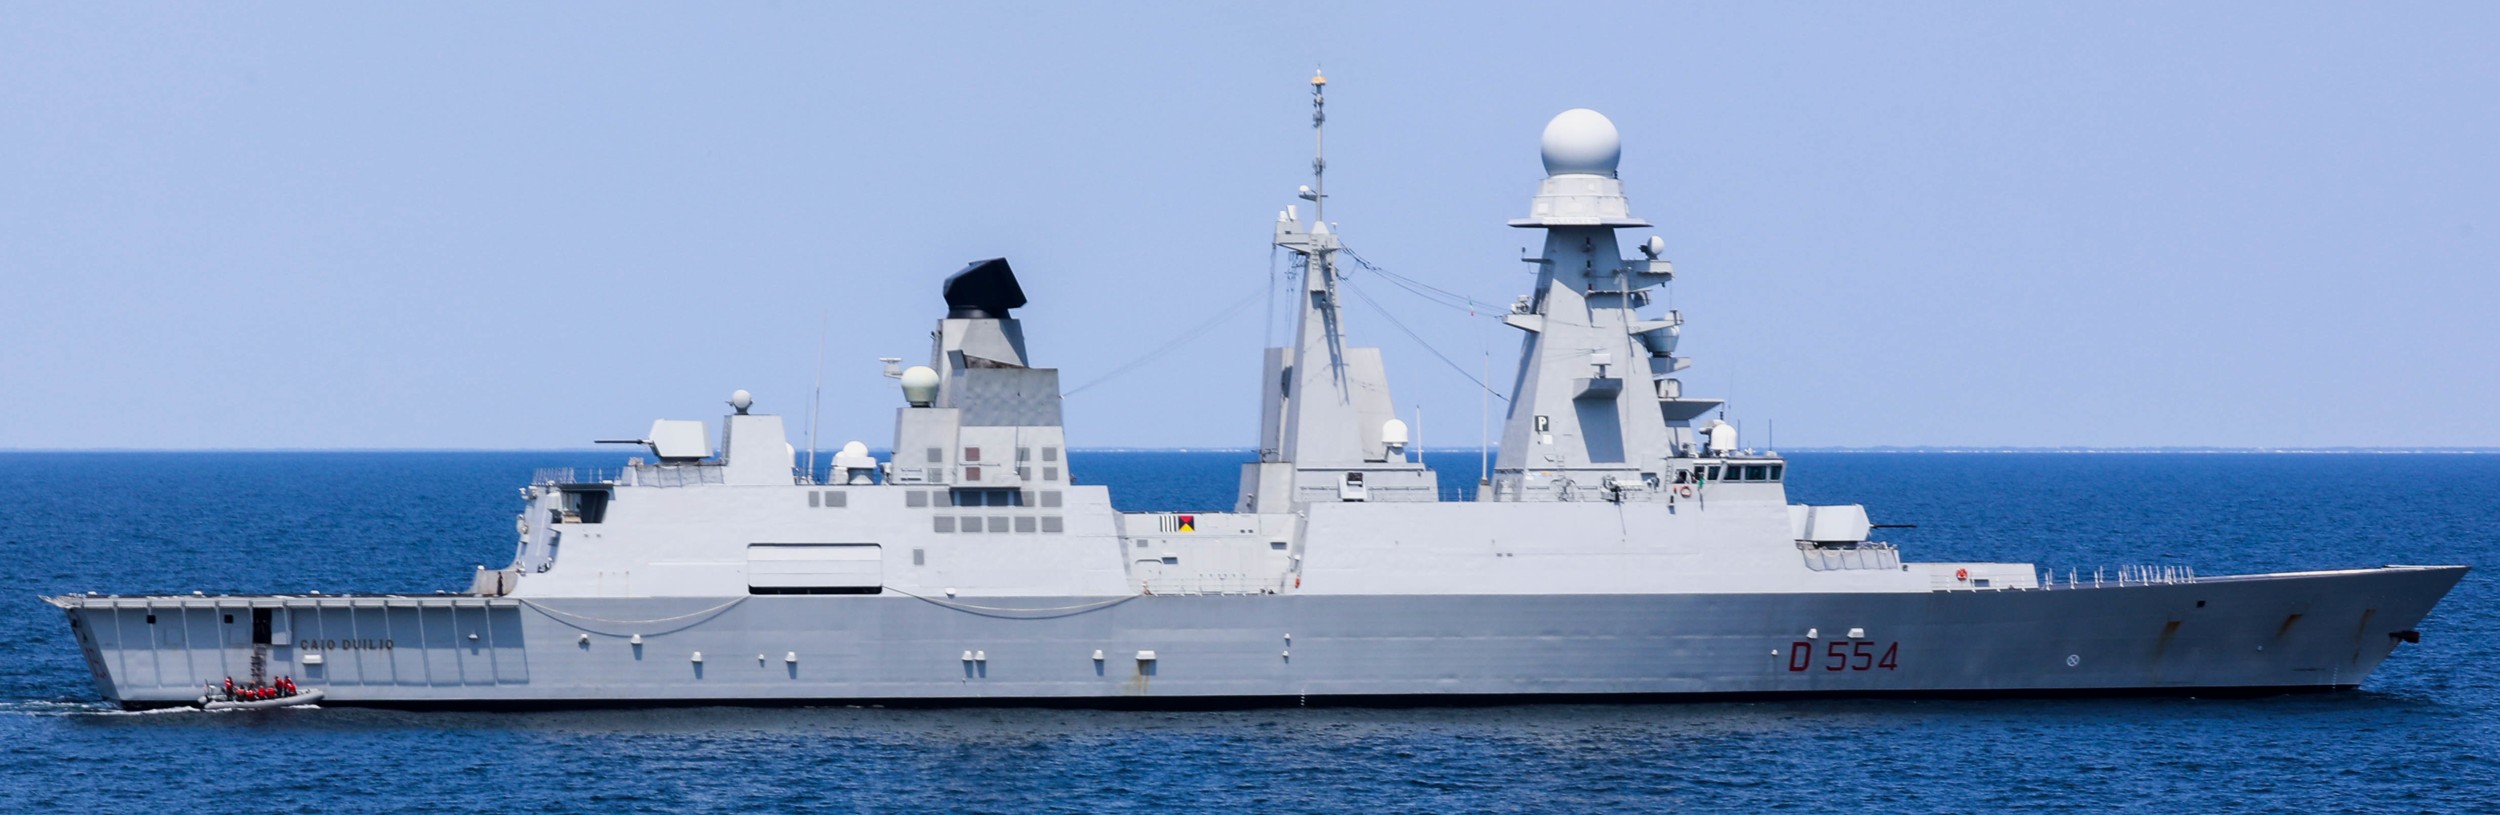 d-554 caio duilio its nave horizon class guided missile destroyer ddgh italian navy marina militare 46